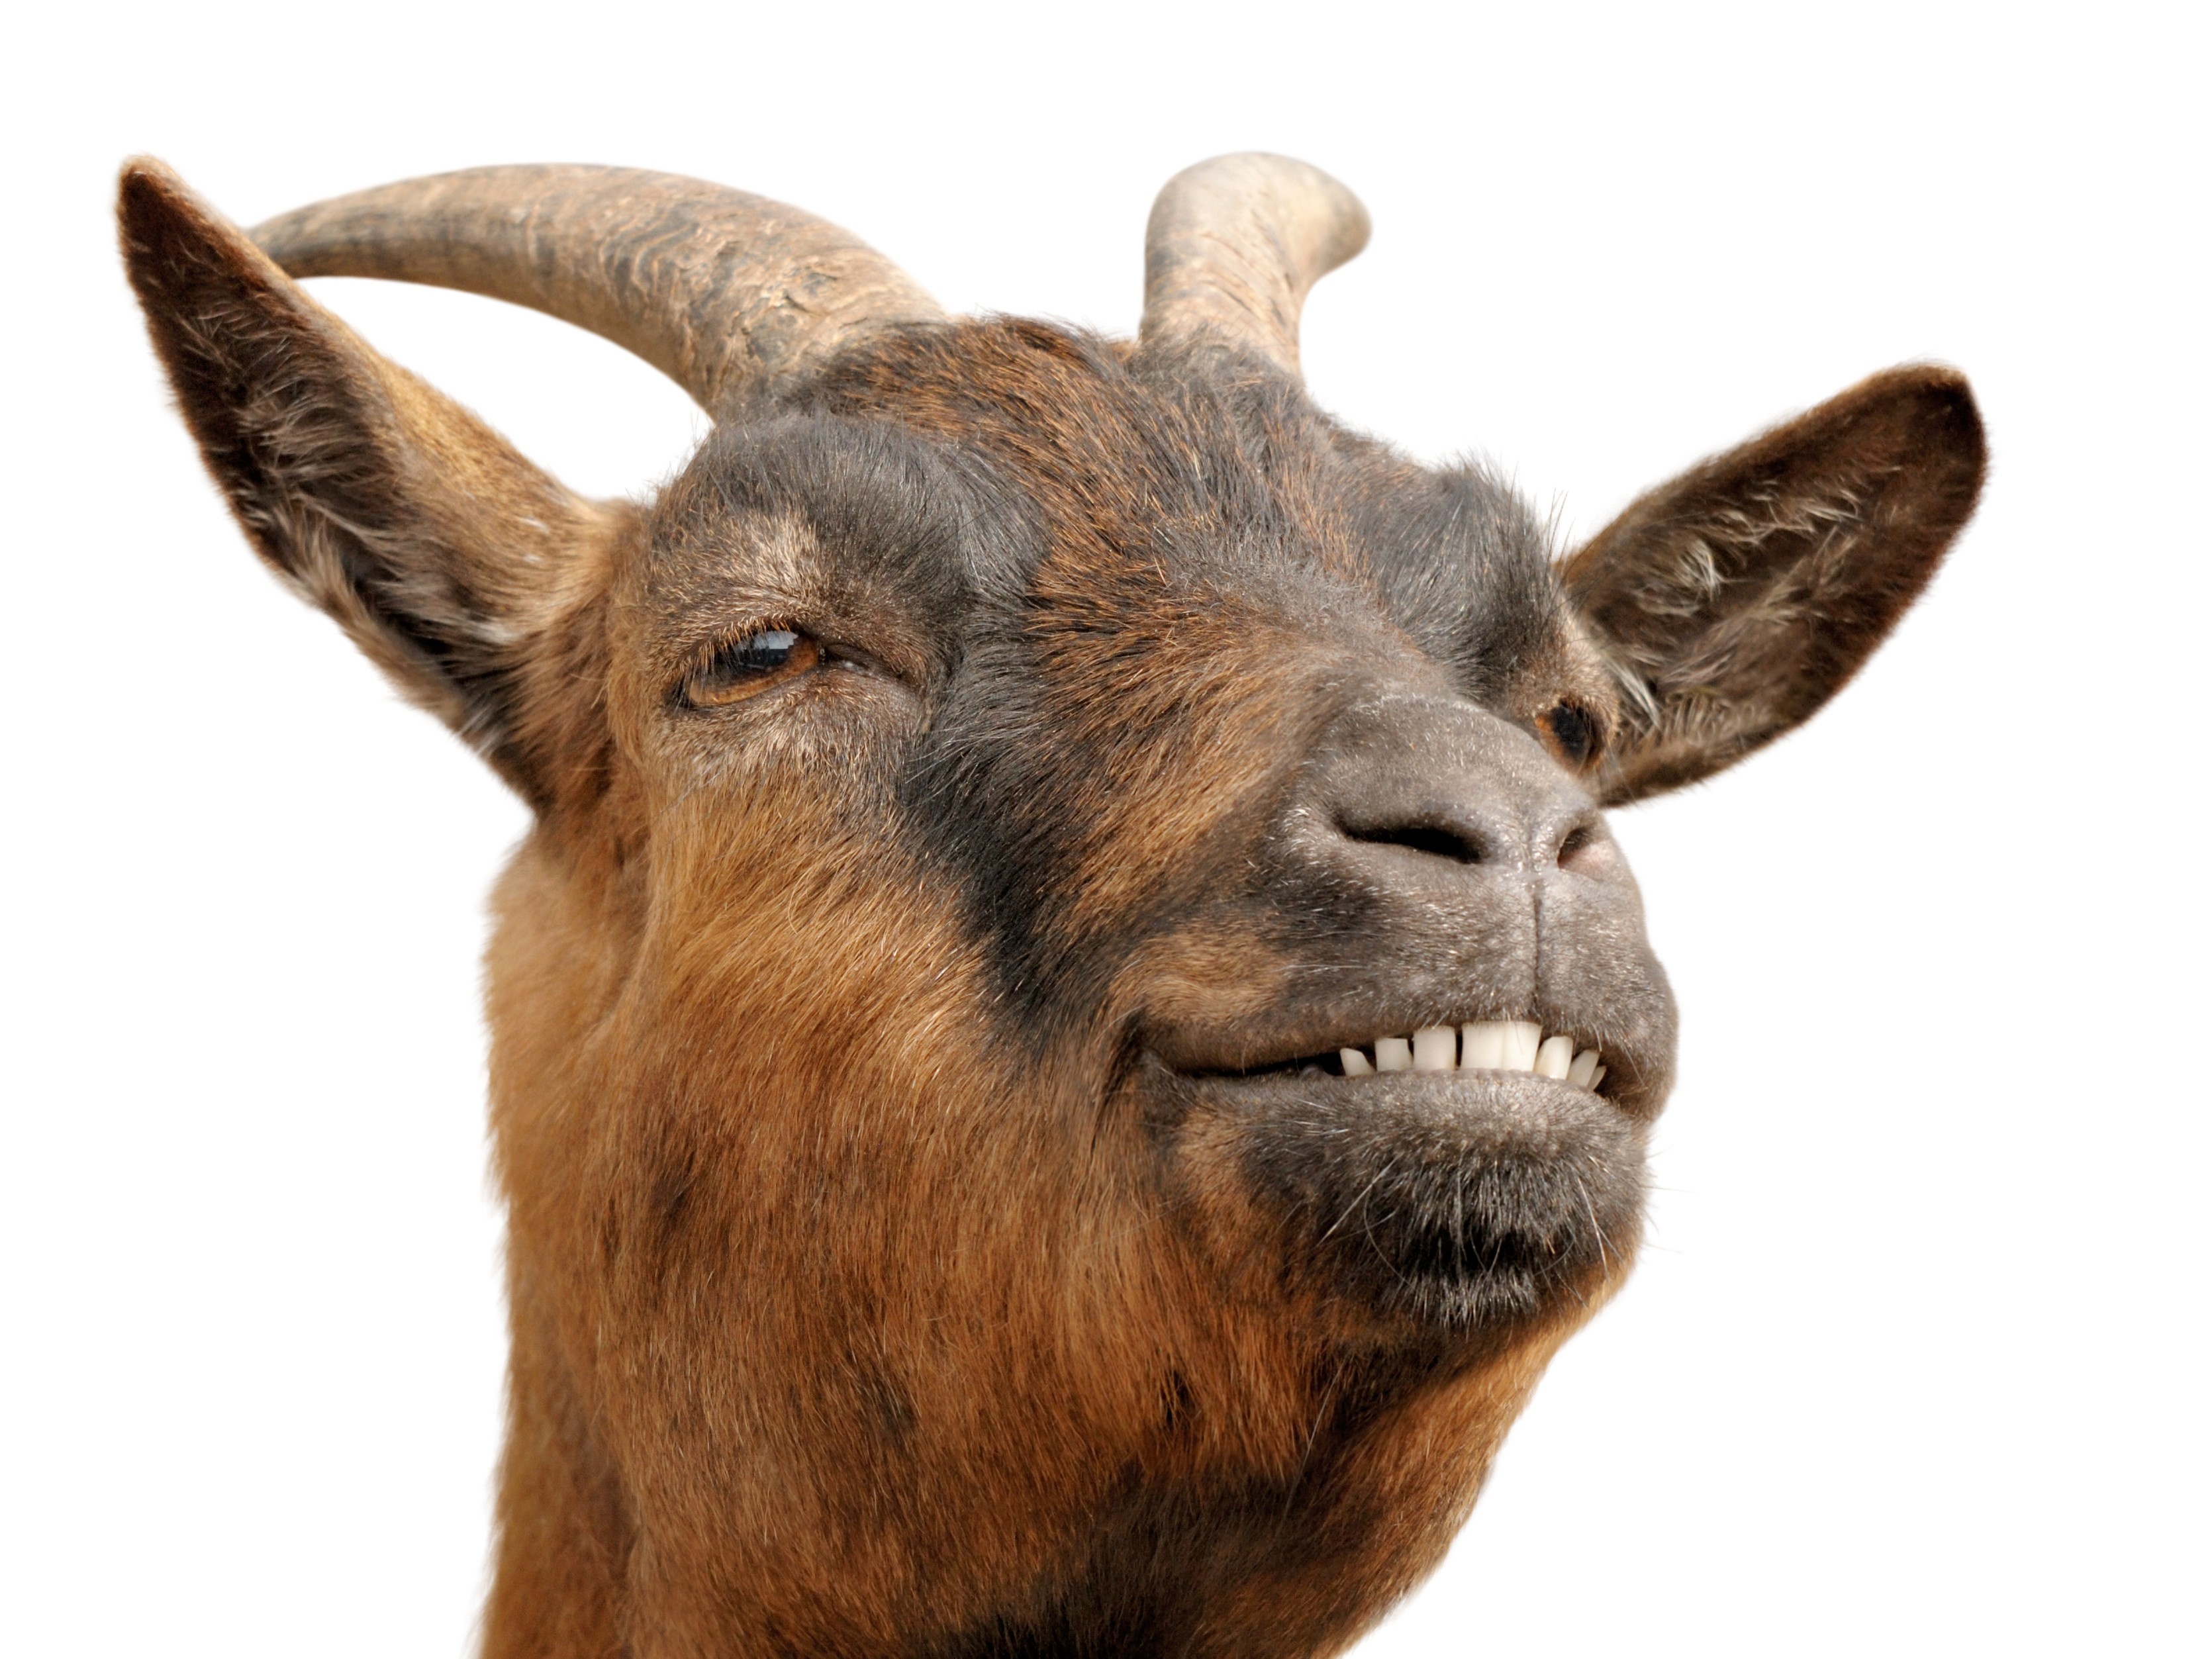 Legend has it that if you kiss an ugly huma prince he'll transform into this goat.